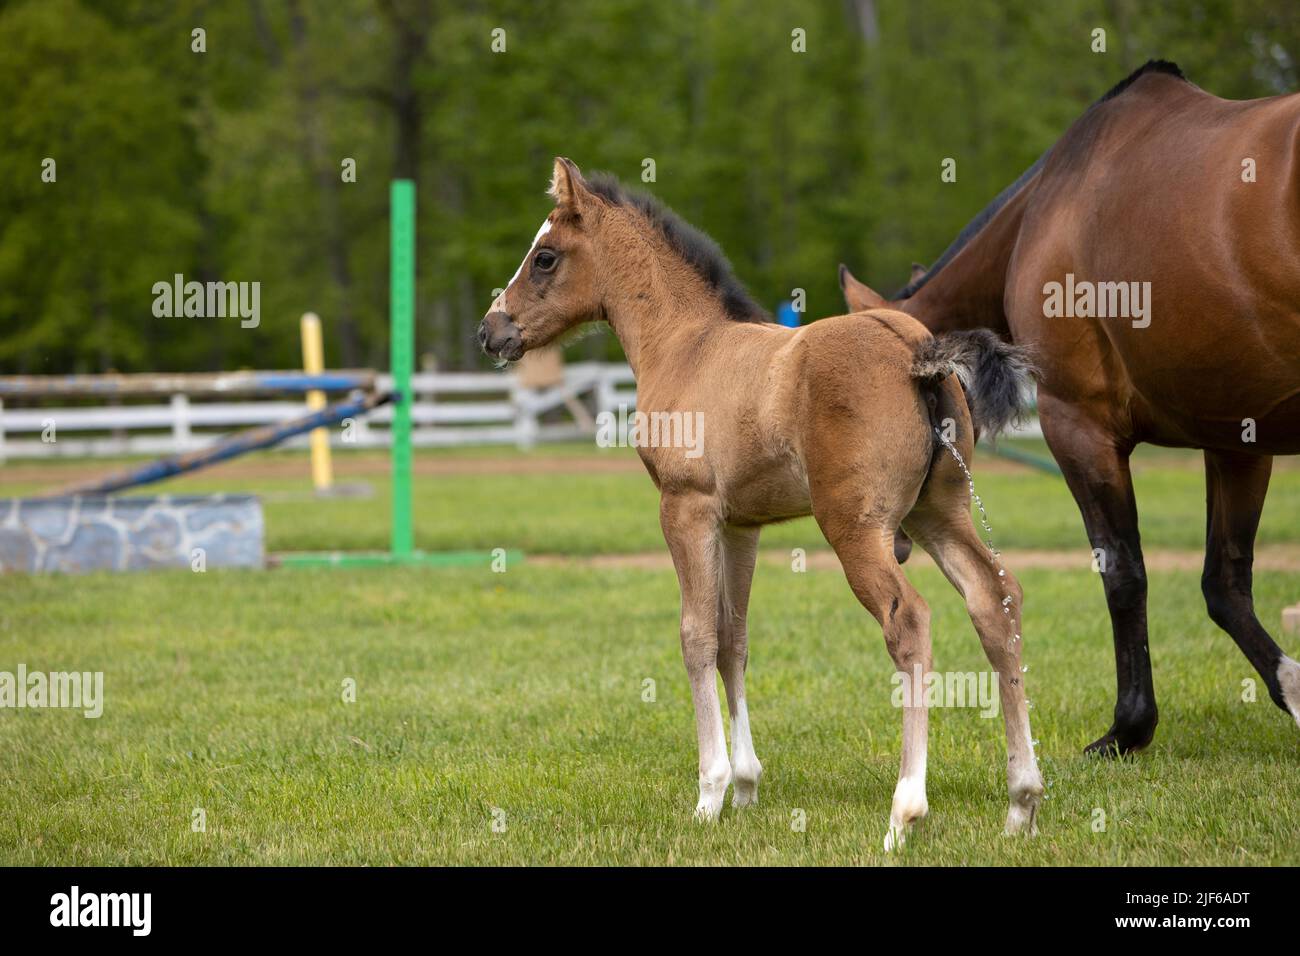 A foal horse standing next to her mother and urinating. Stock Photo